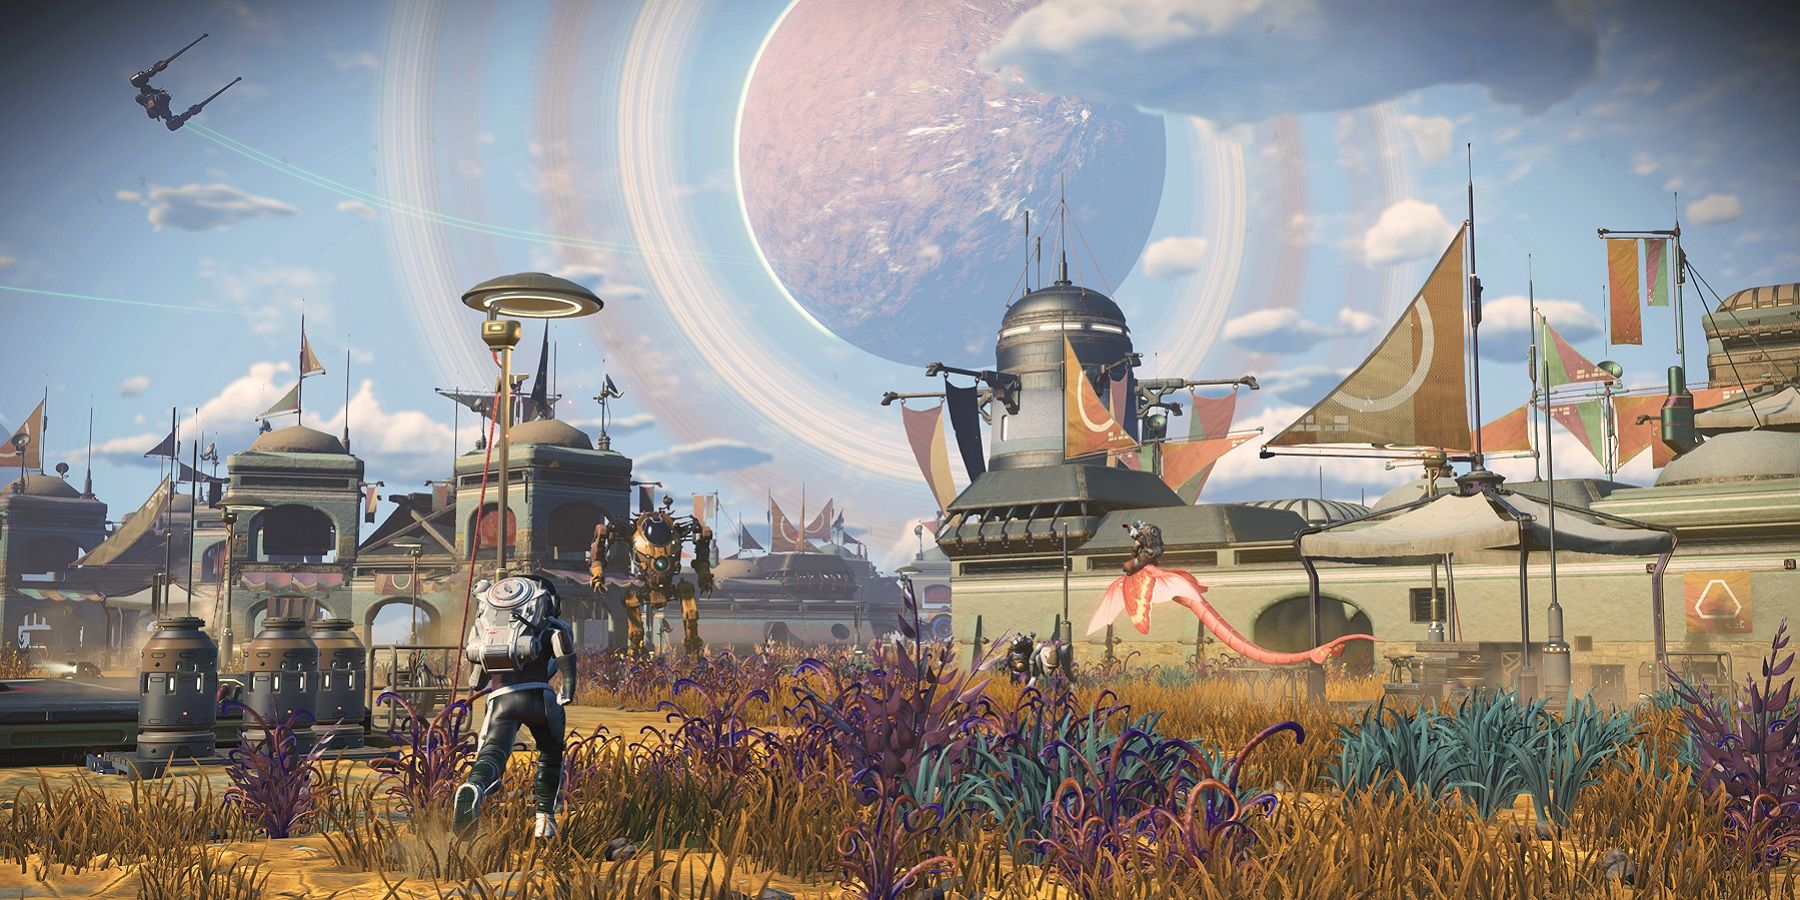 Screenshot from No Man's Sky showing the player approaching a settlment, with another planet hanging in the sky in the distance.